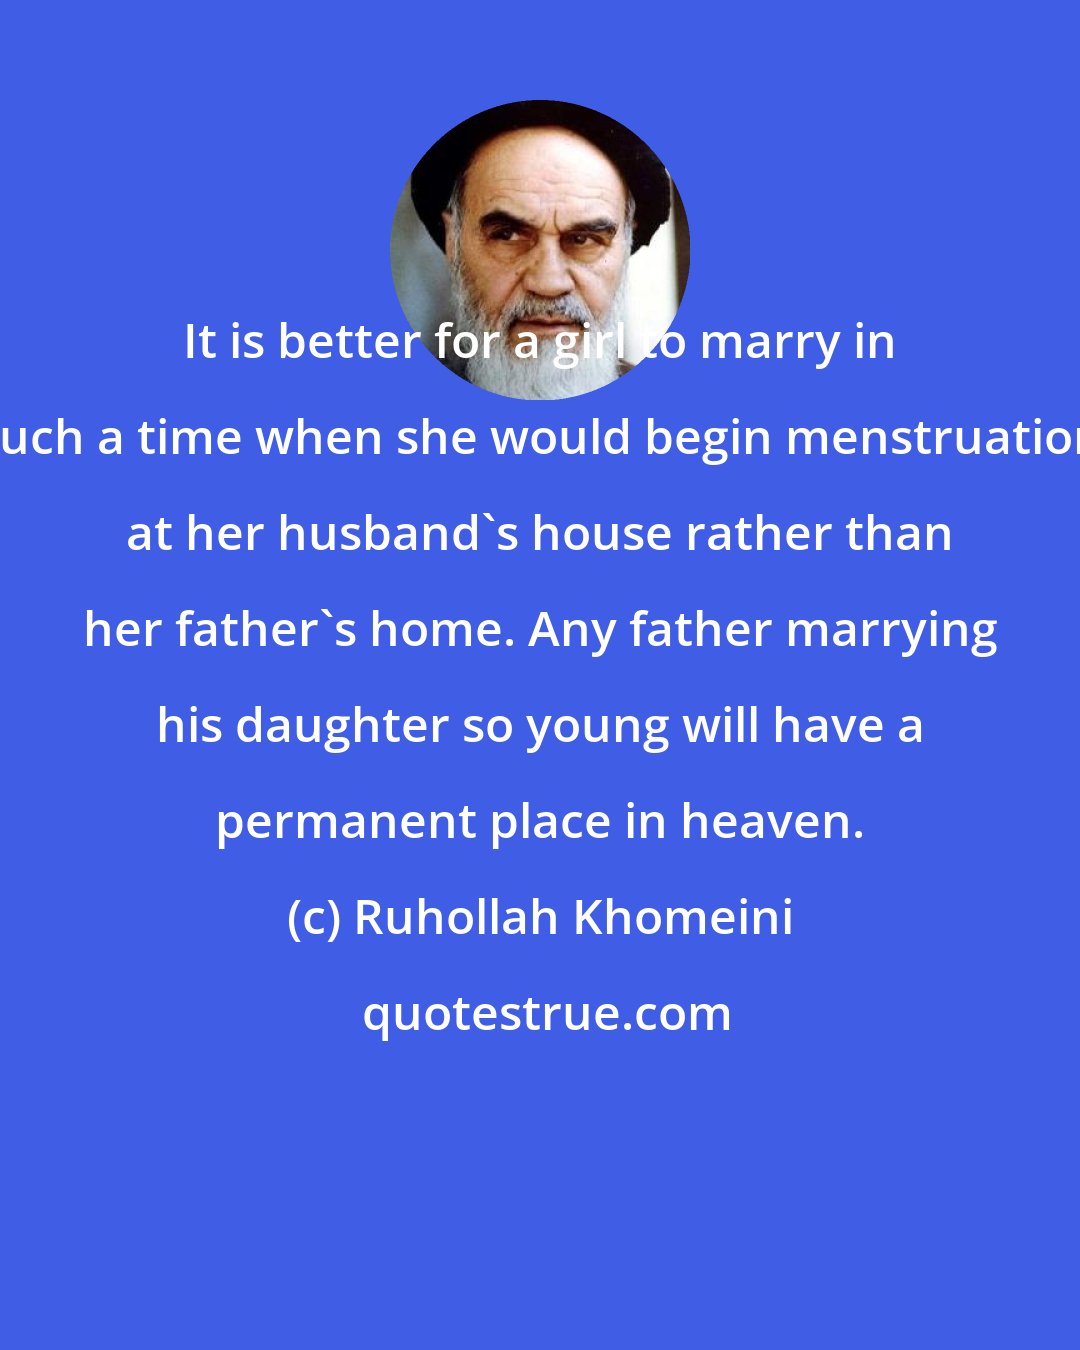 Ruhollah Khomeini: It is better for a girl to marry in such a time when she would begin menstruation at her husband's house rather than her father's home. Any father marrying his daughter so young will have a permanent place in heaven.